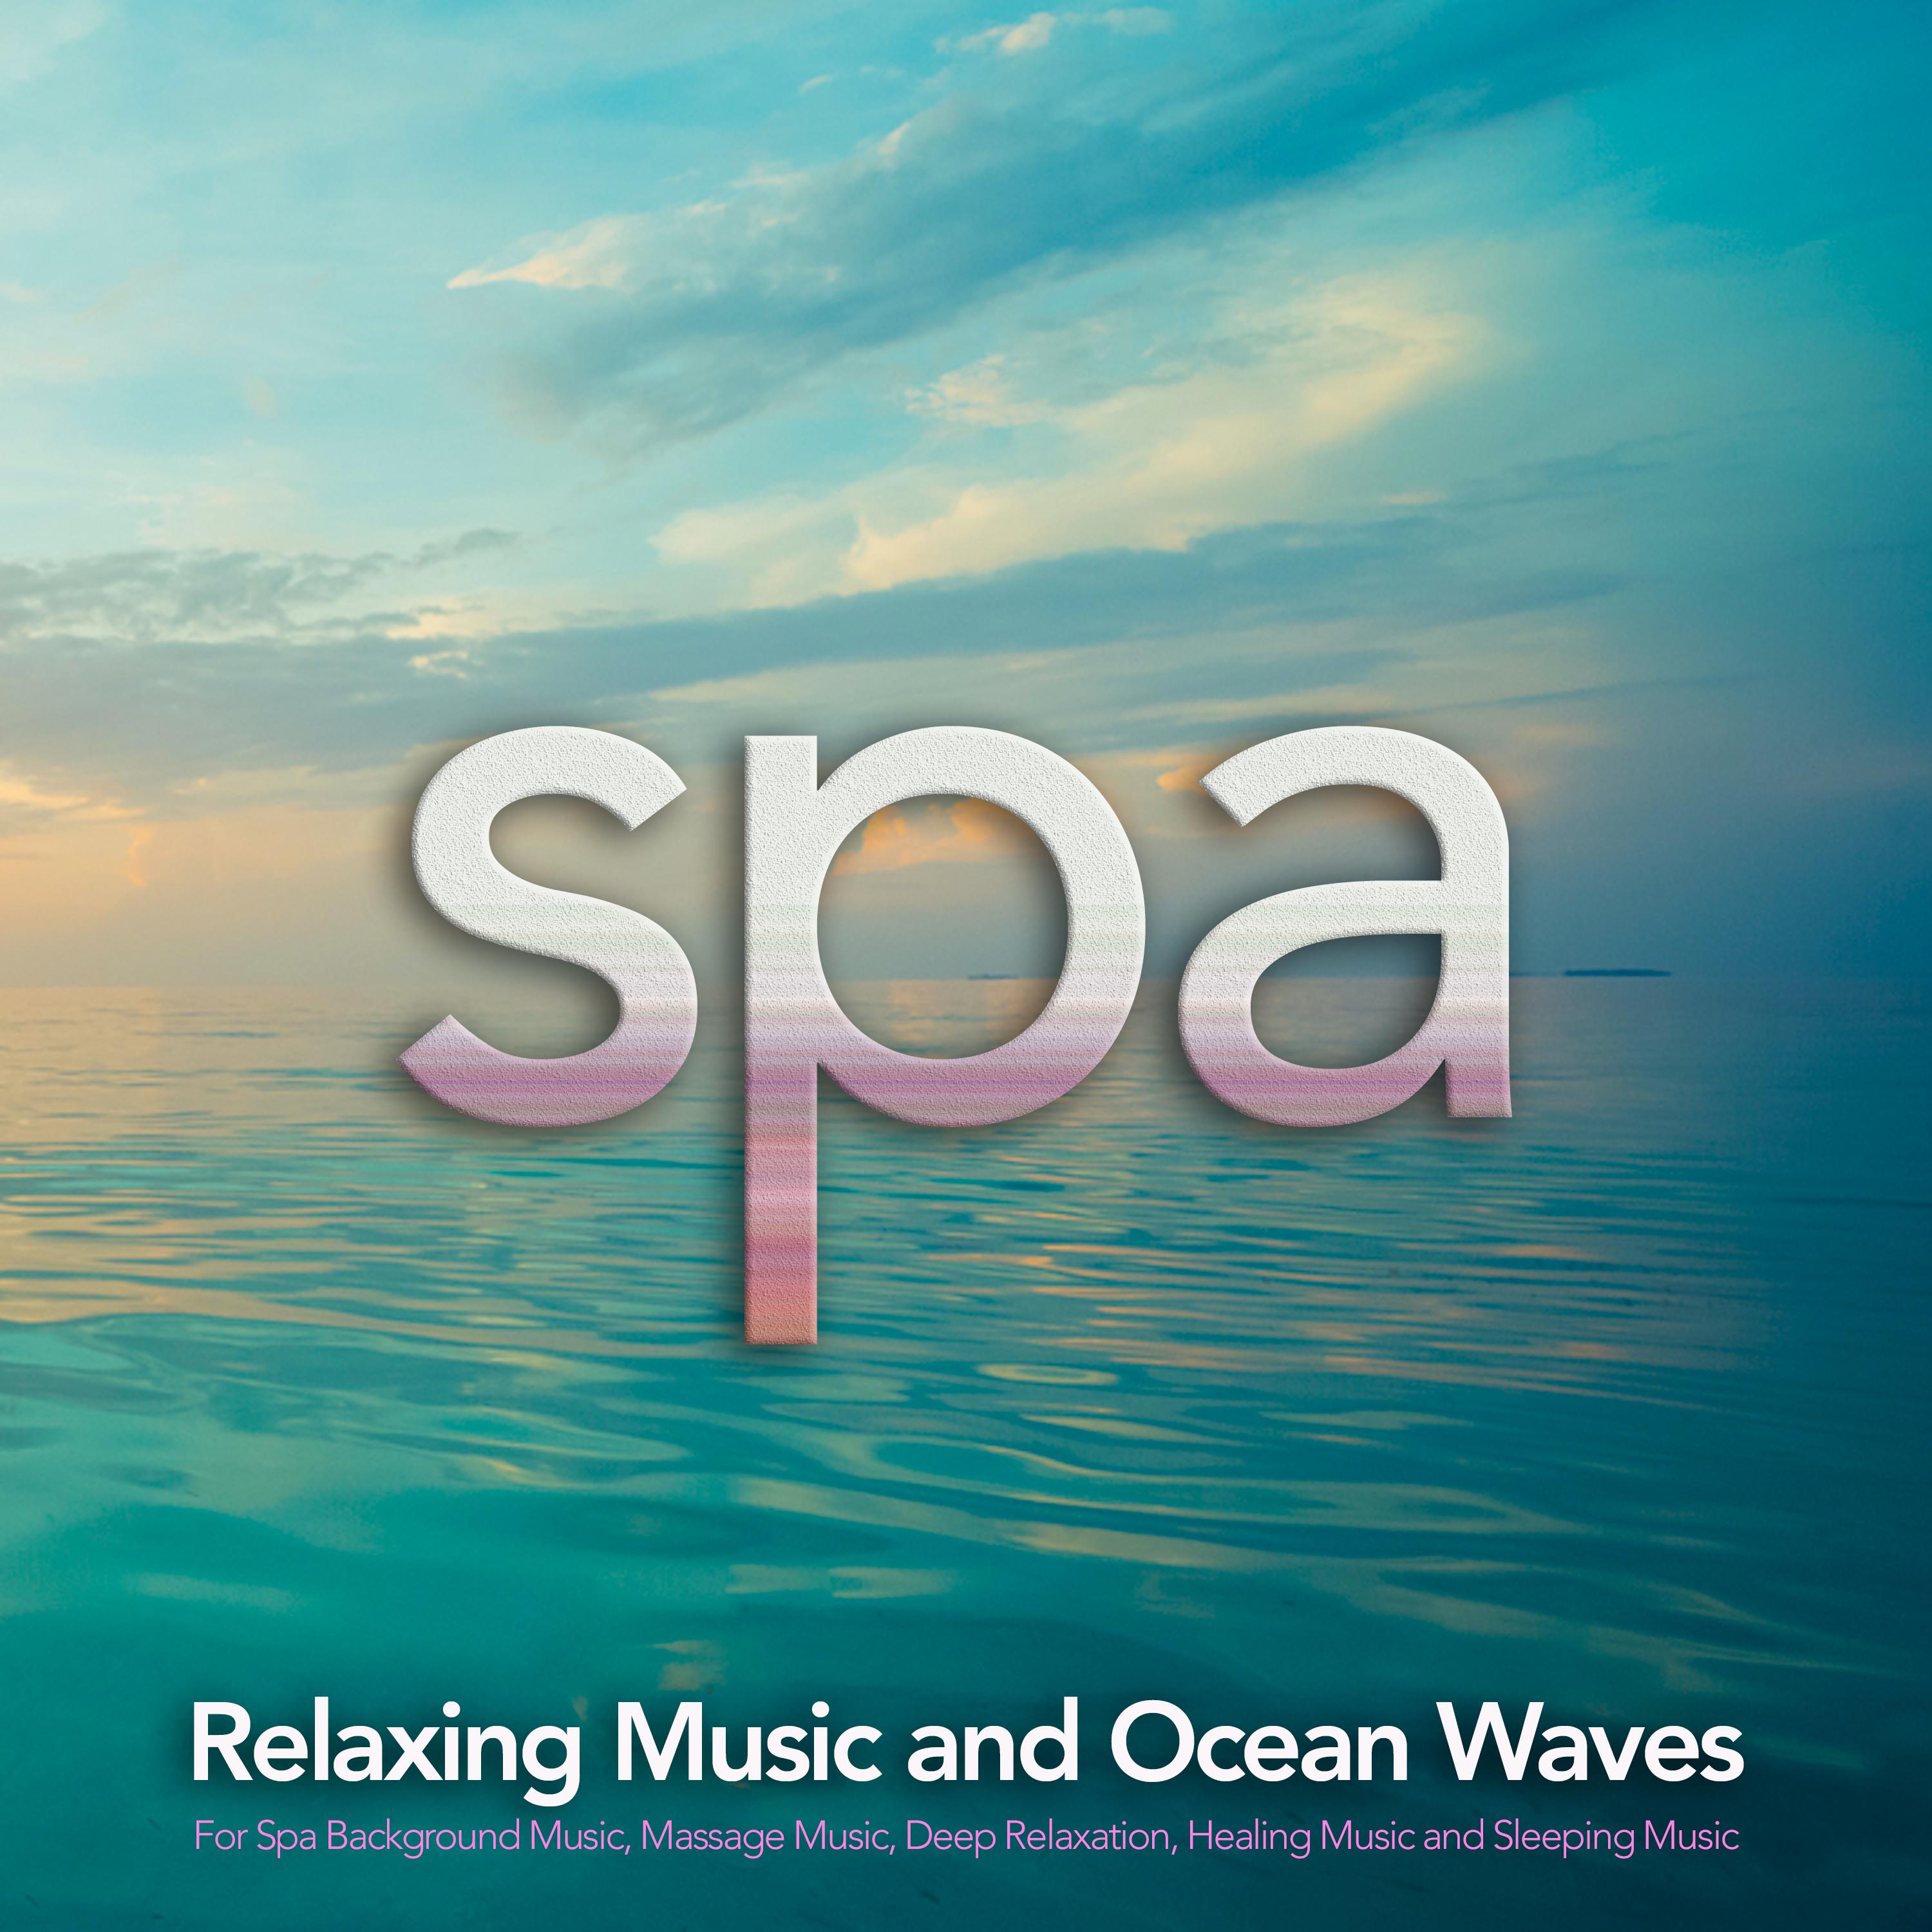 Ocean Waves and Relaxing Music